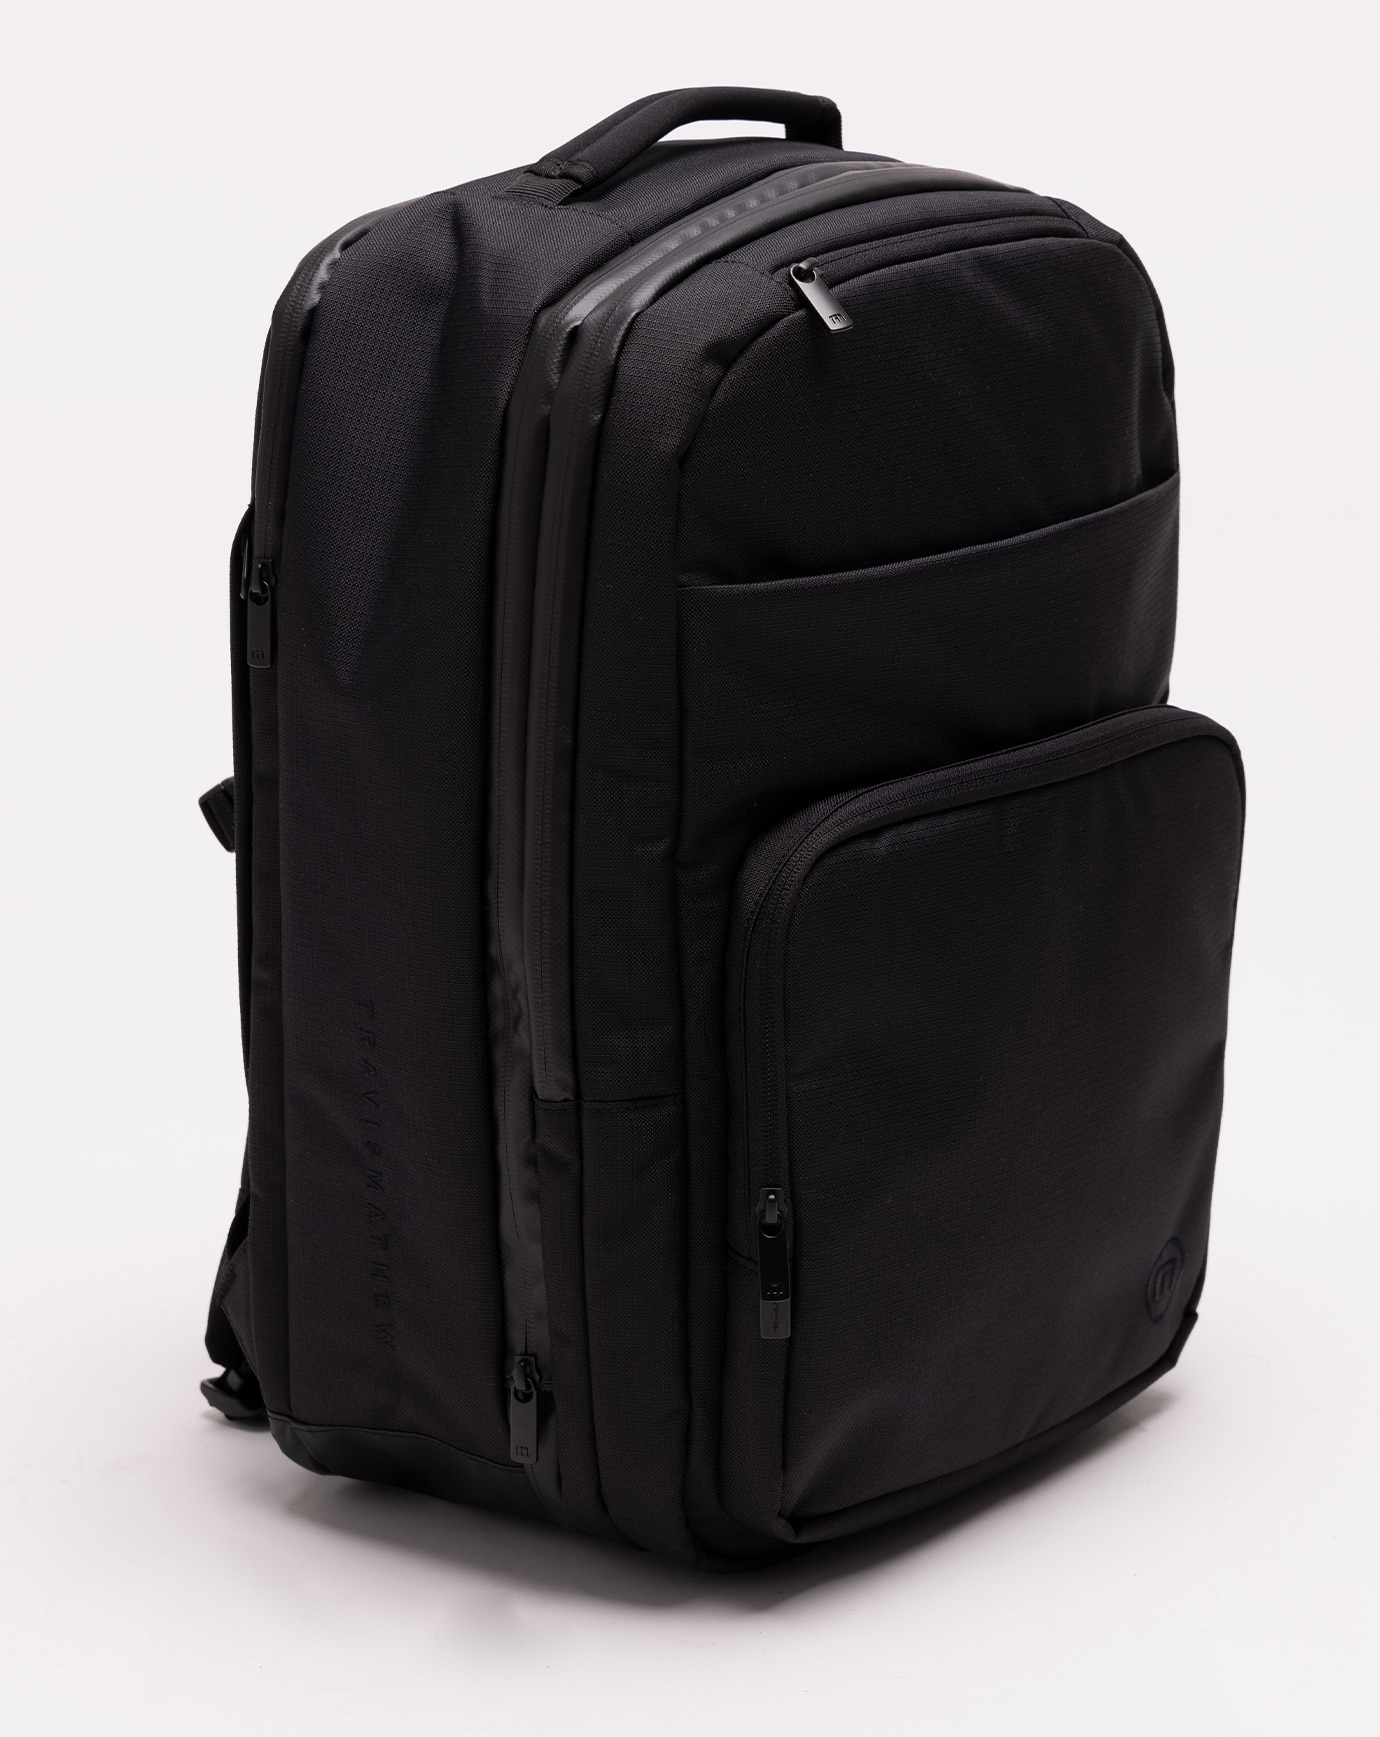 1ST CLASS BACKPACK Image Thumbnail 2